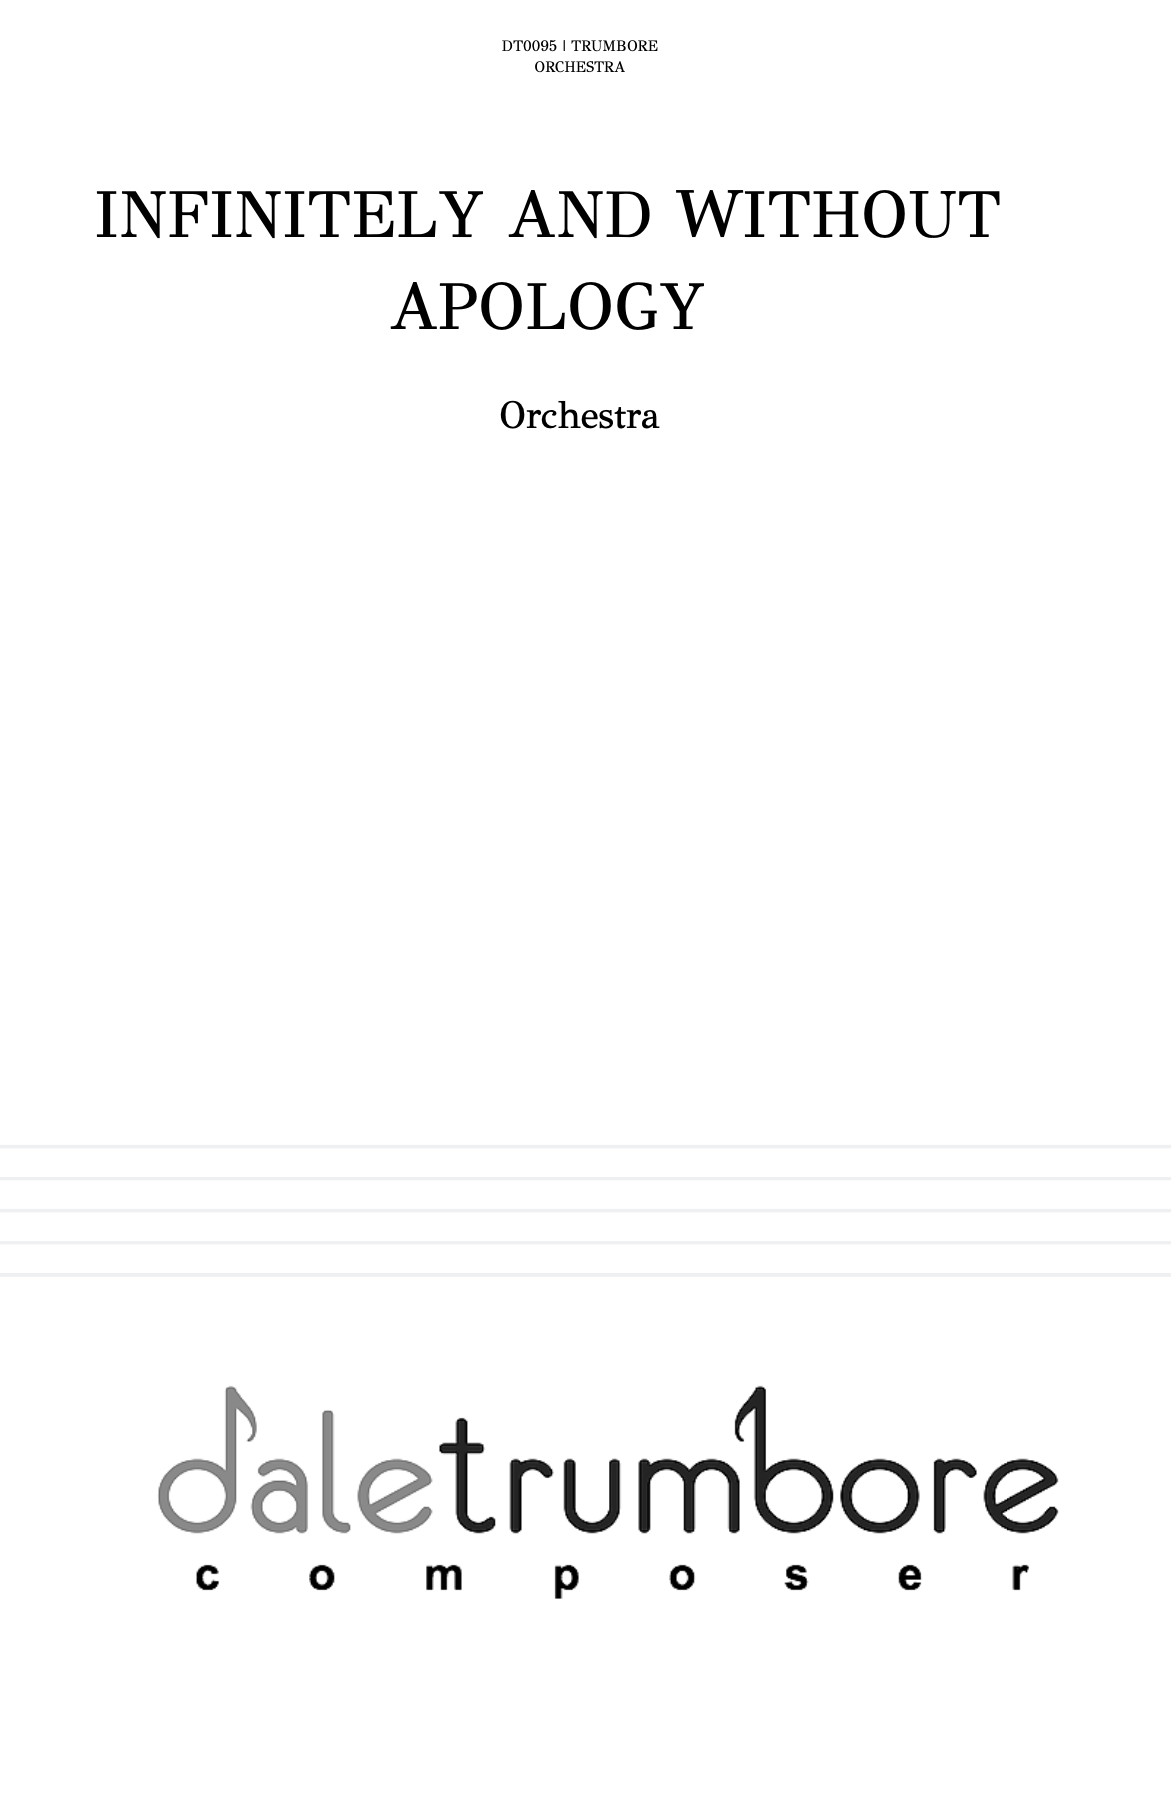 Infinitely And Without Apology (Score Only) by Dale Trumbore